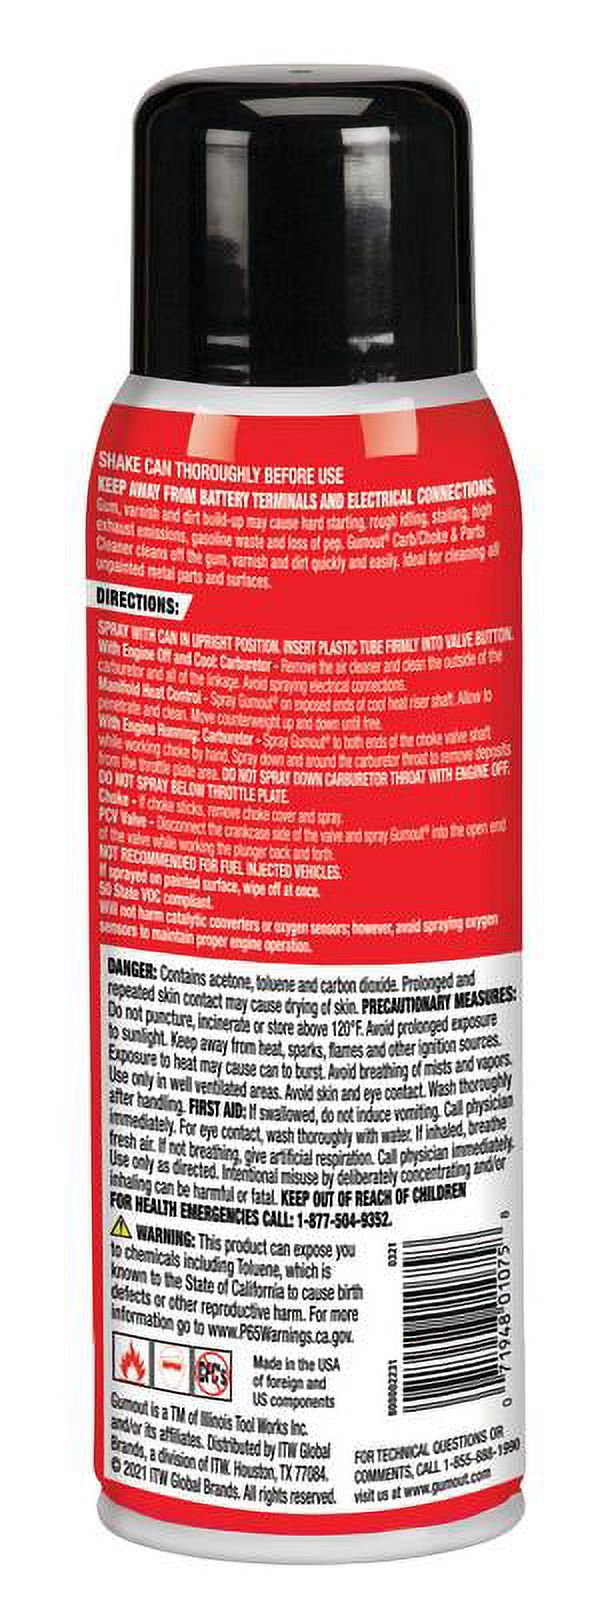 Gumout Carb/Choke and Parts Cleaner 14 oz - 800002231W - image 2 of 5